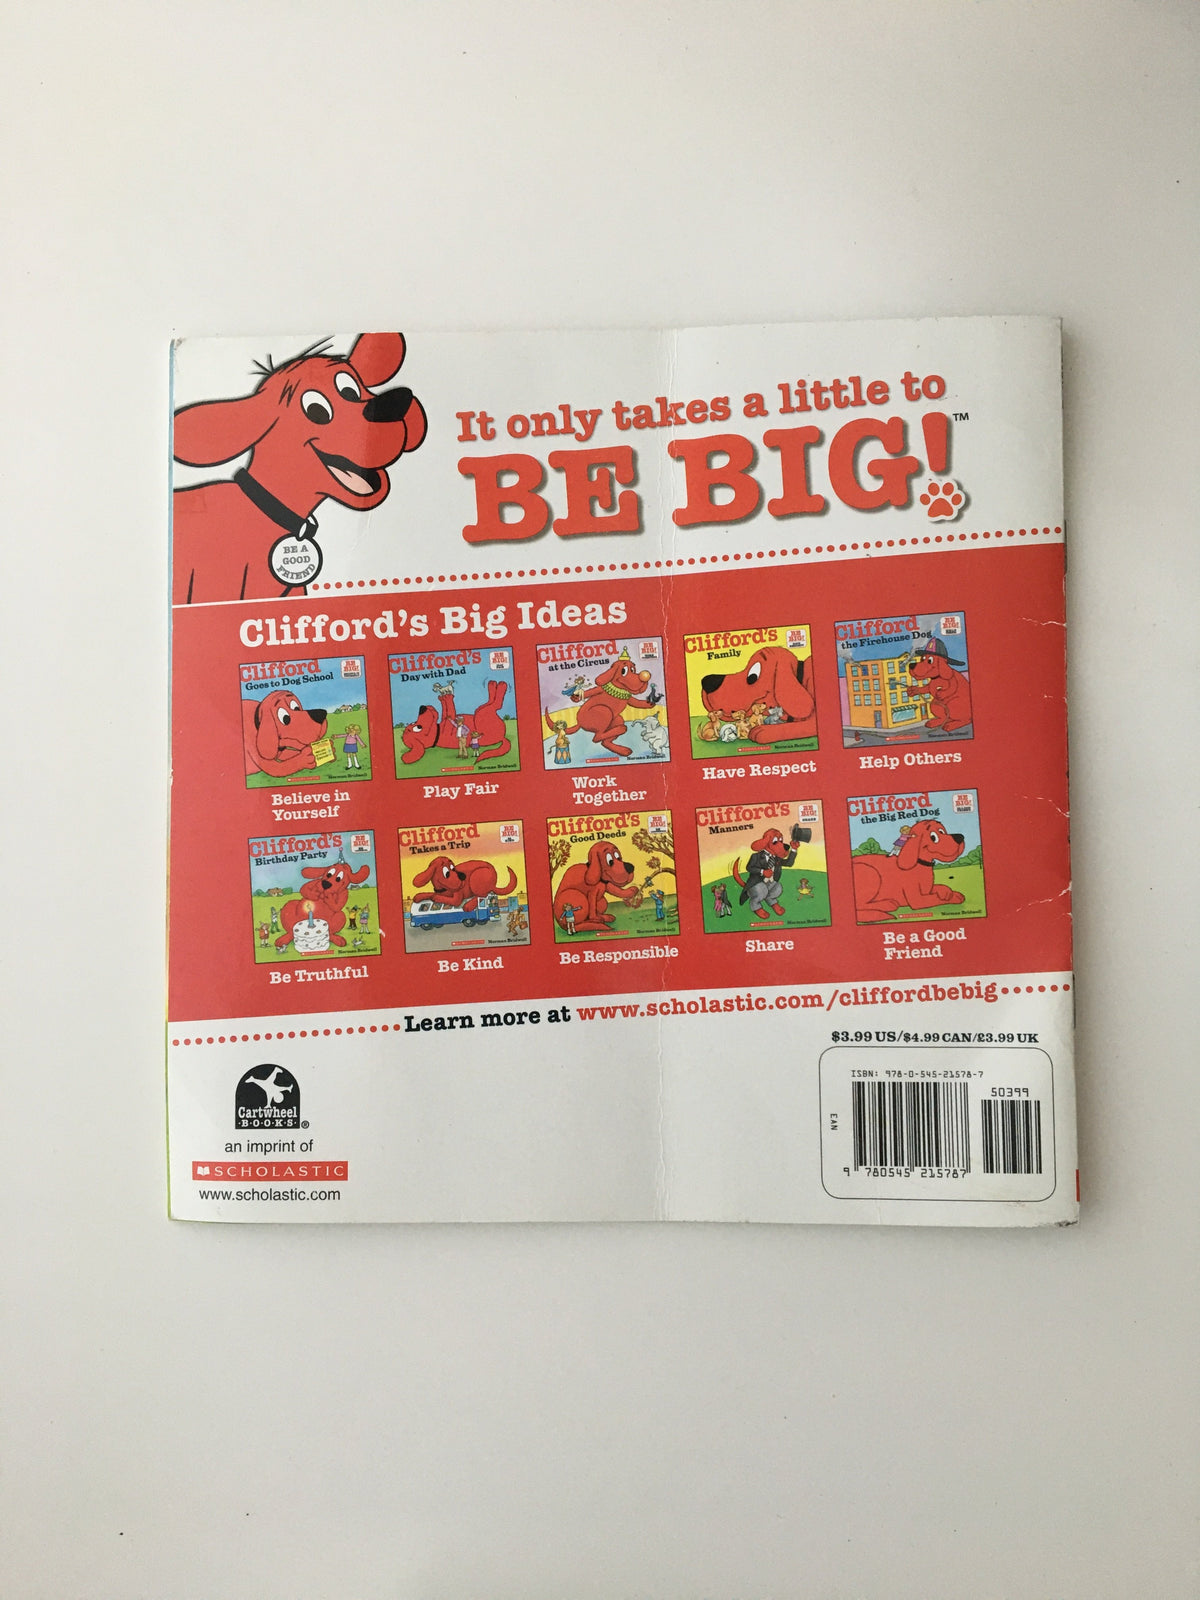 Clifford the Big red Dog by Norman Bridwell